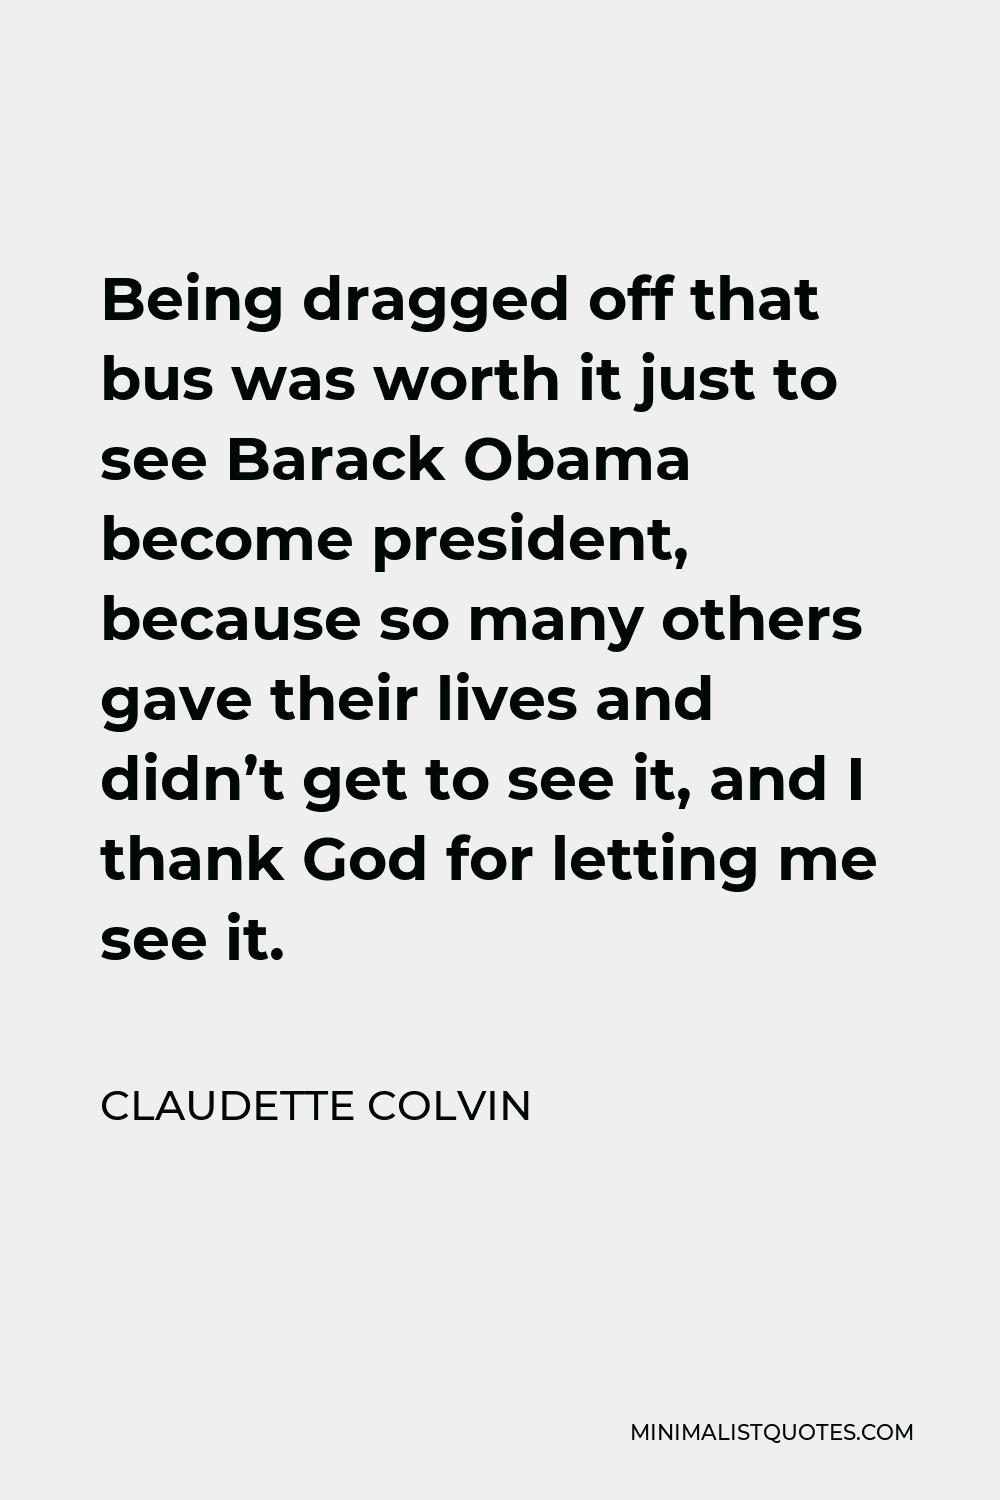 Claudette Colvin Quote - Being dragged off that bus was worth it just to see Barack Obama become president, because so many others gave their lives and didn’t get to see it, and I thank God for letting me see it.